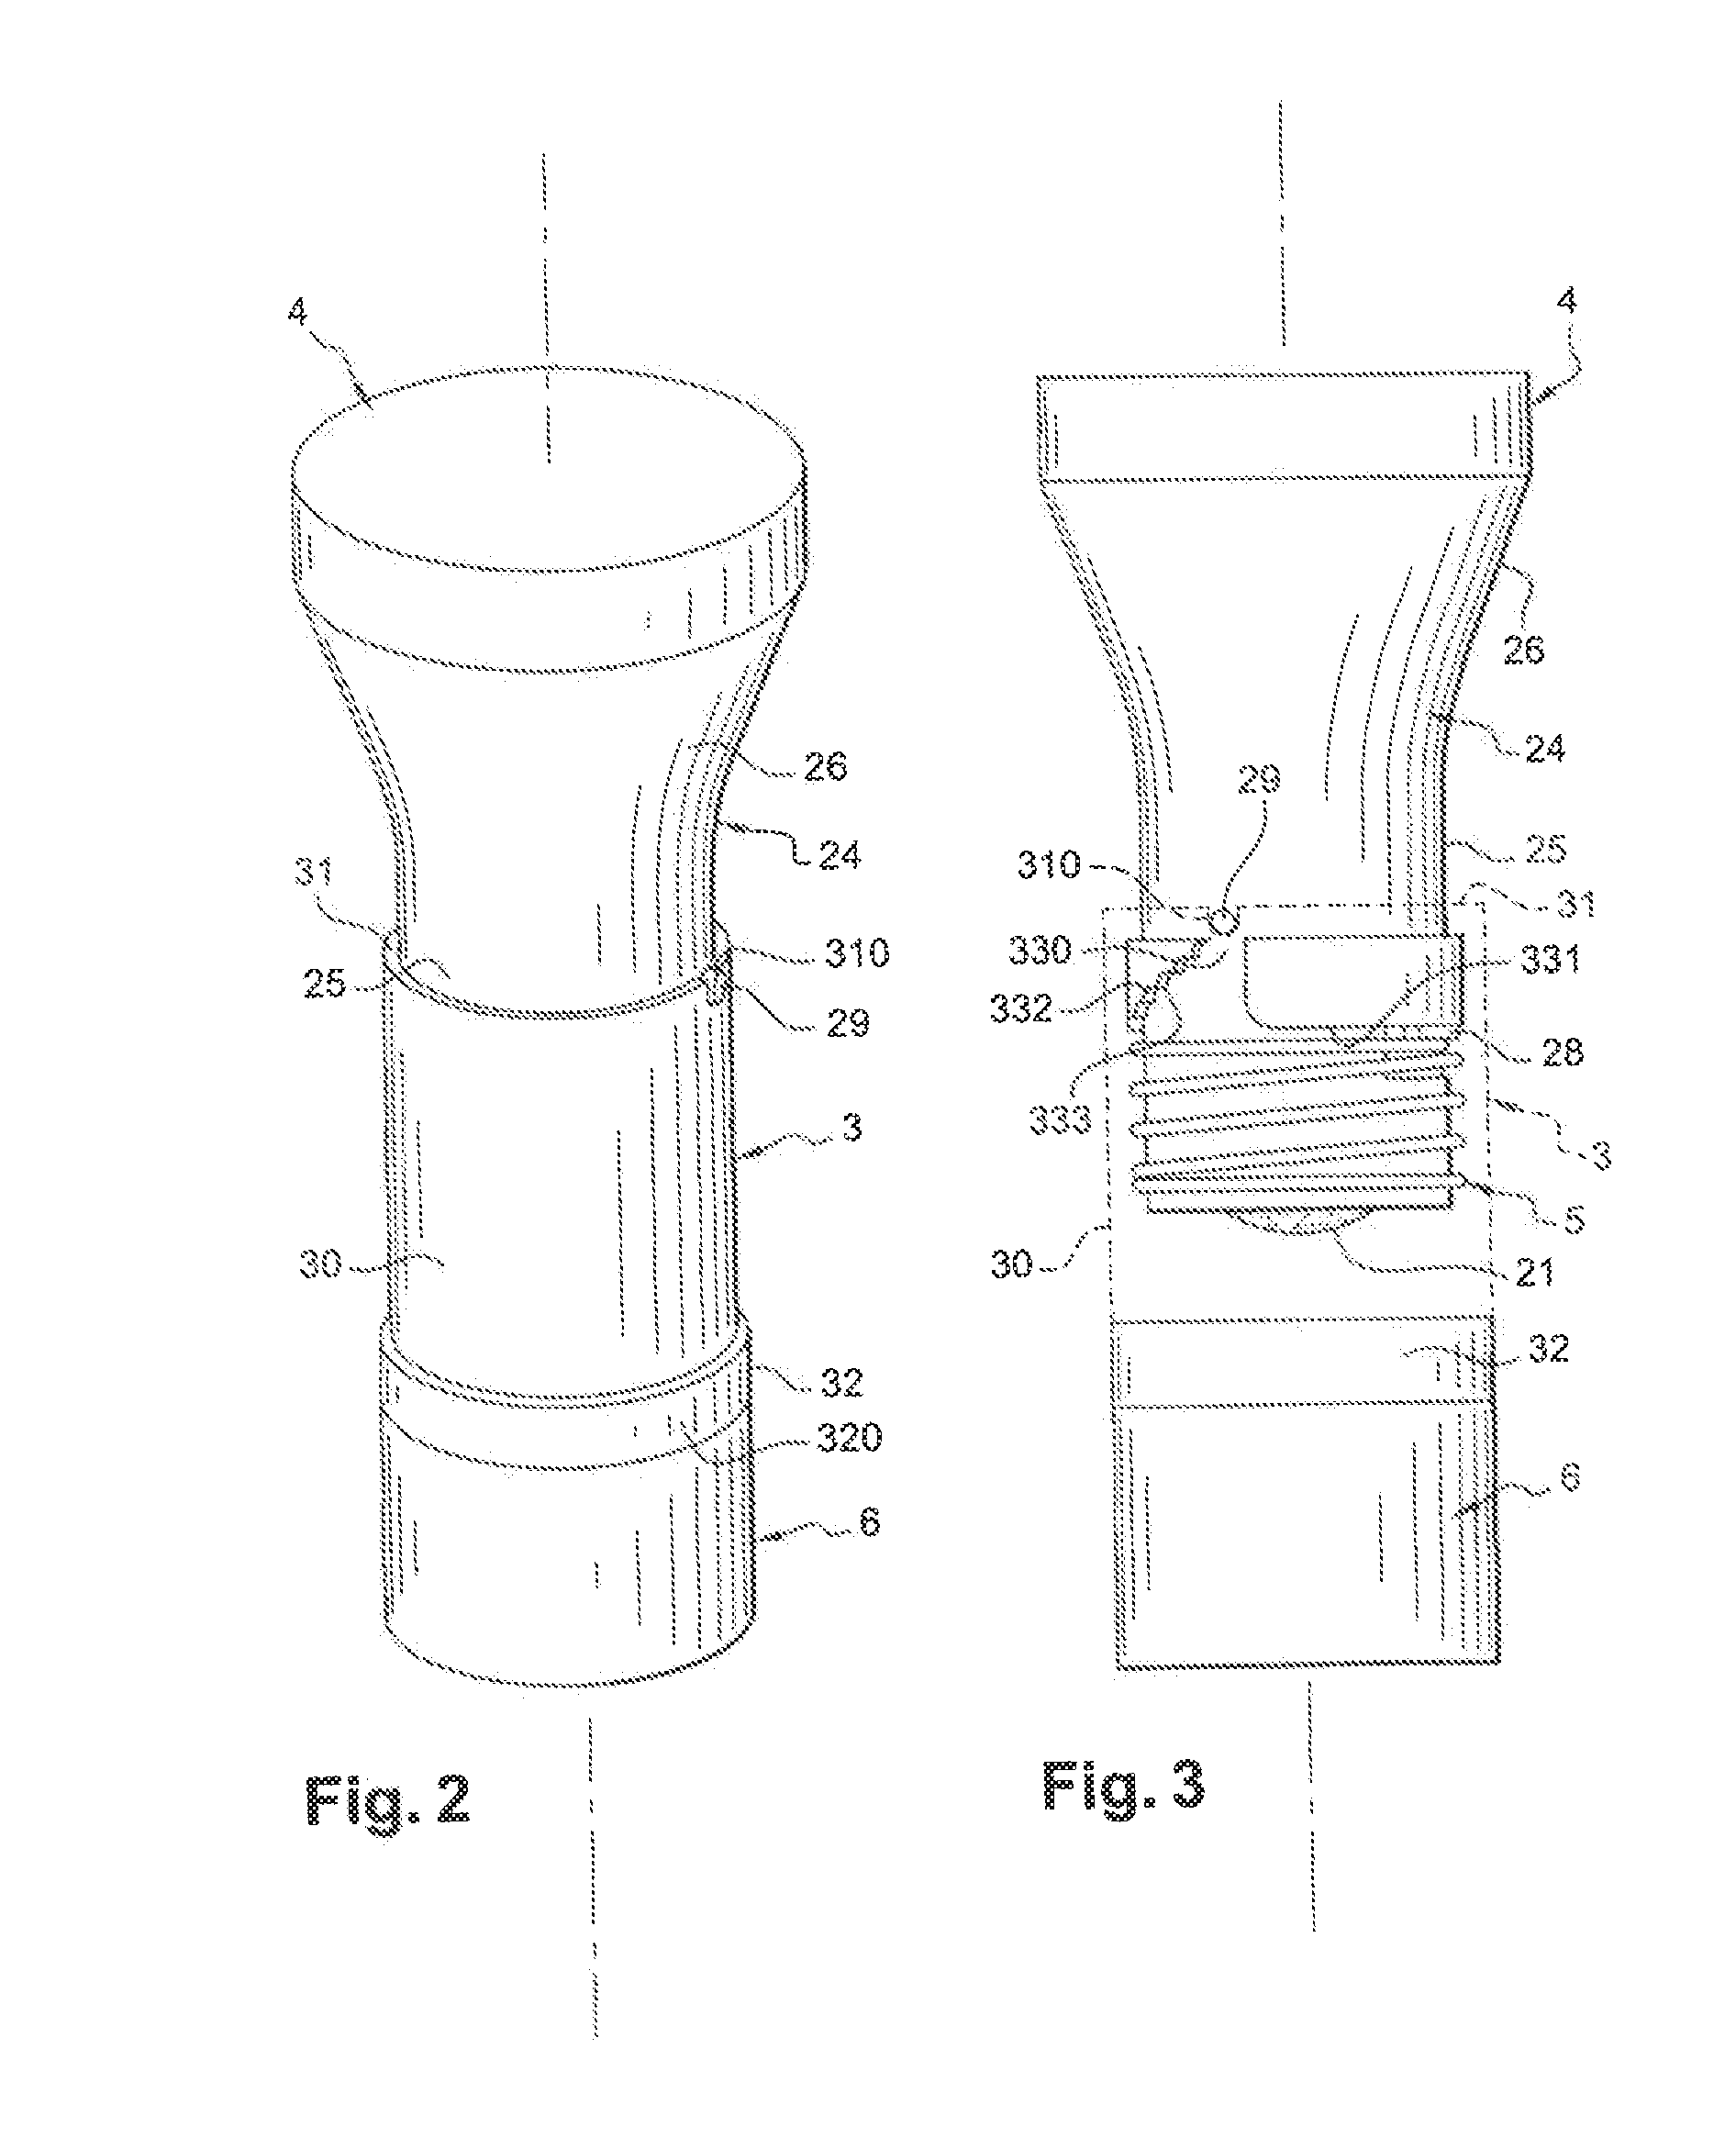 Device for packaging and applying a cosmetic product